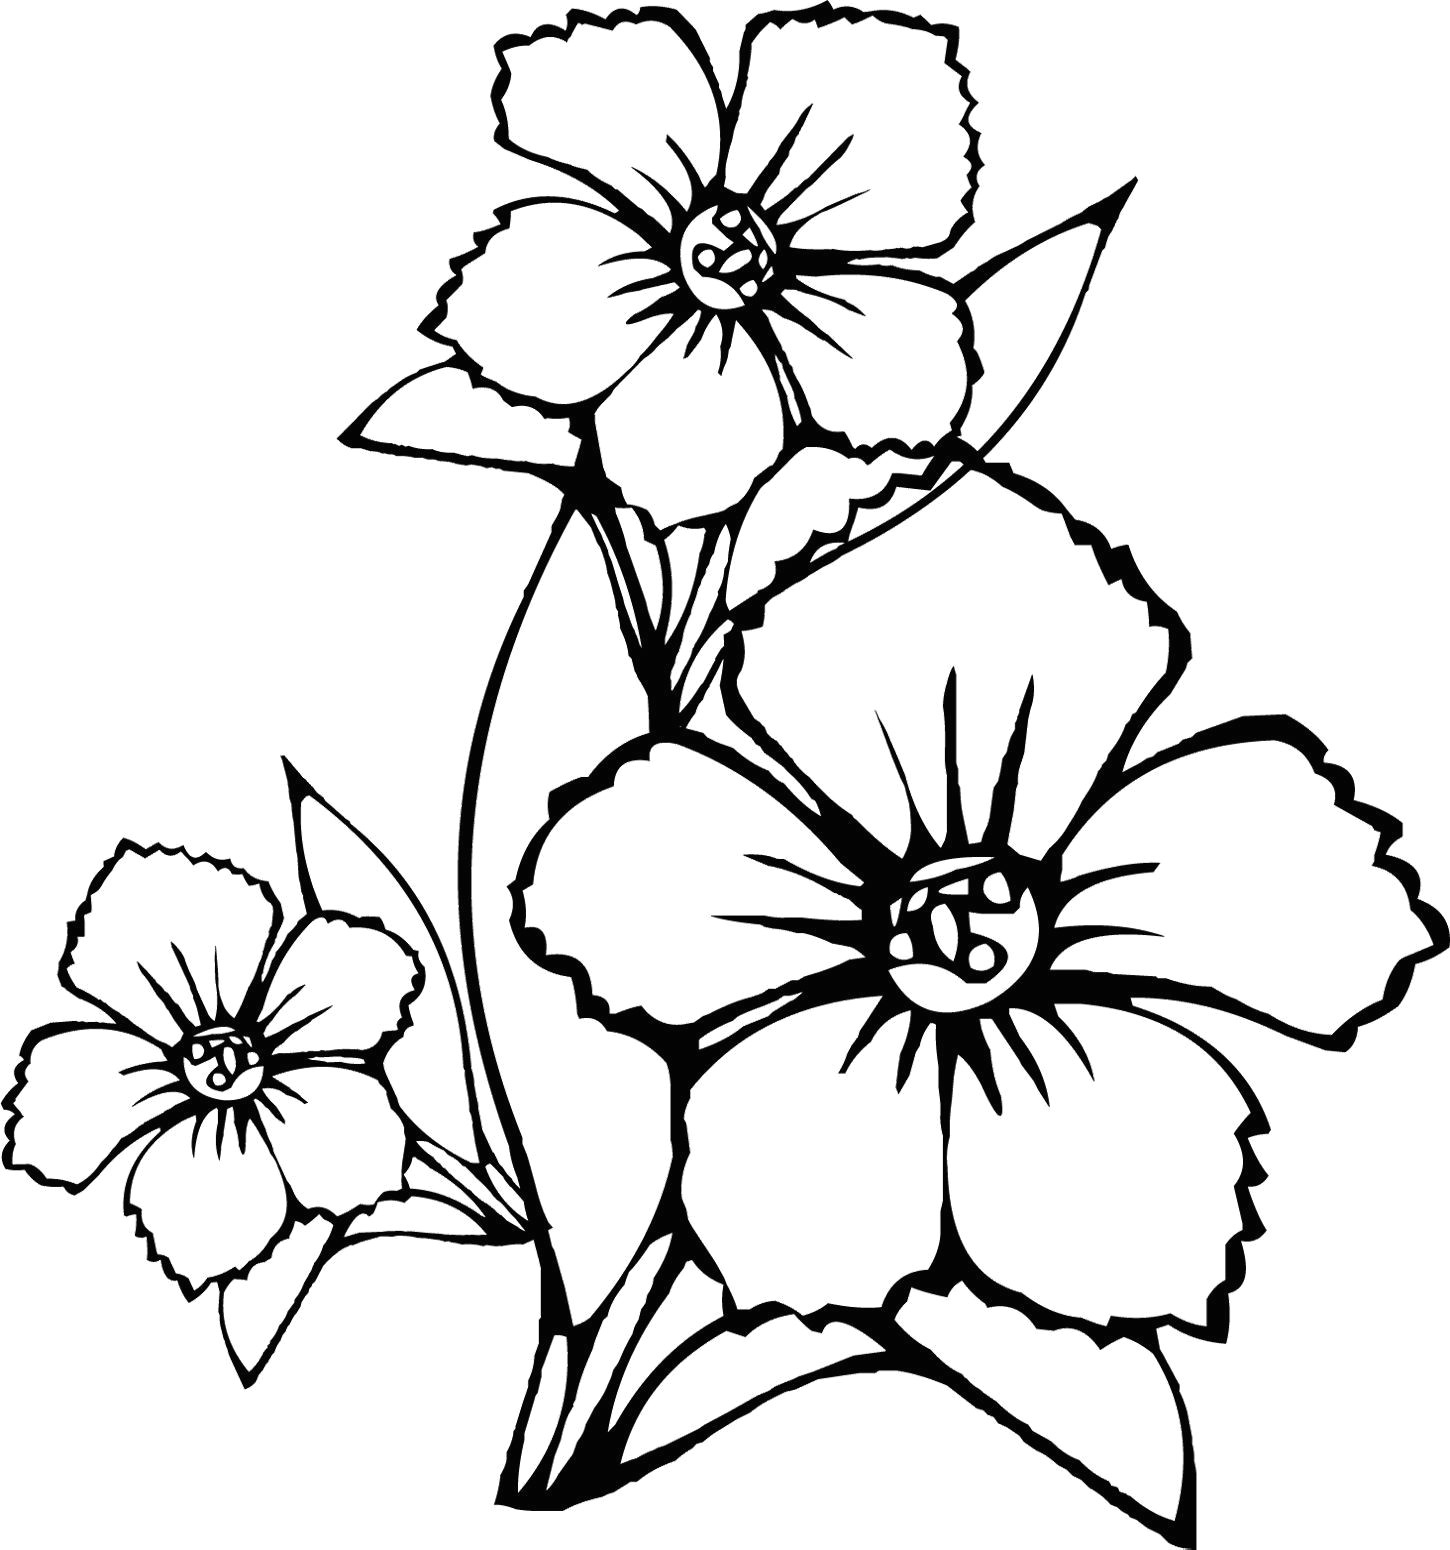 how to draw flowers step by step for beginners luxury new vases flower vase coloring page